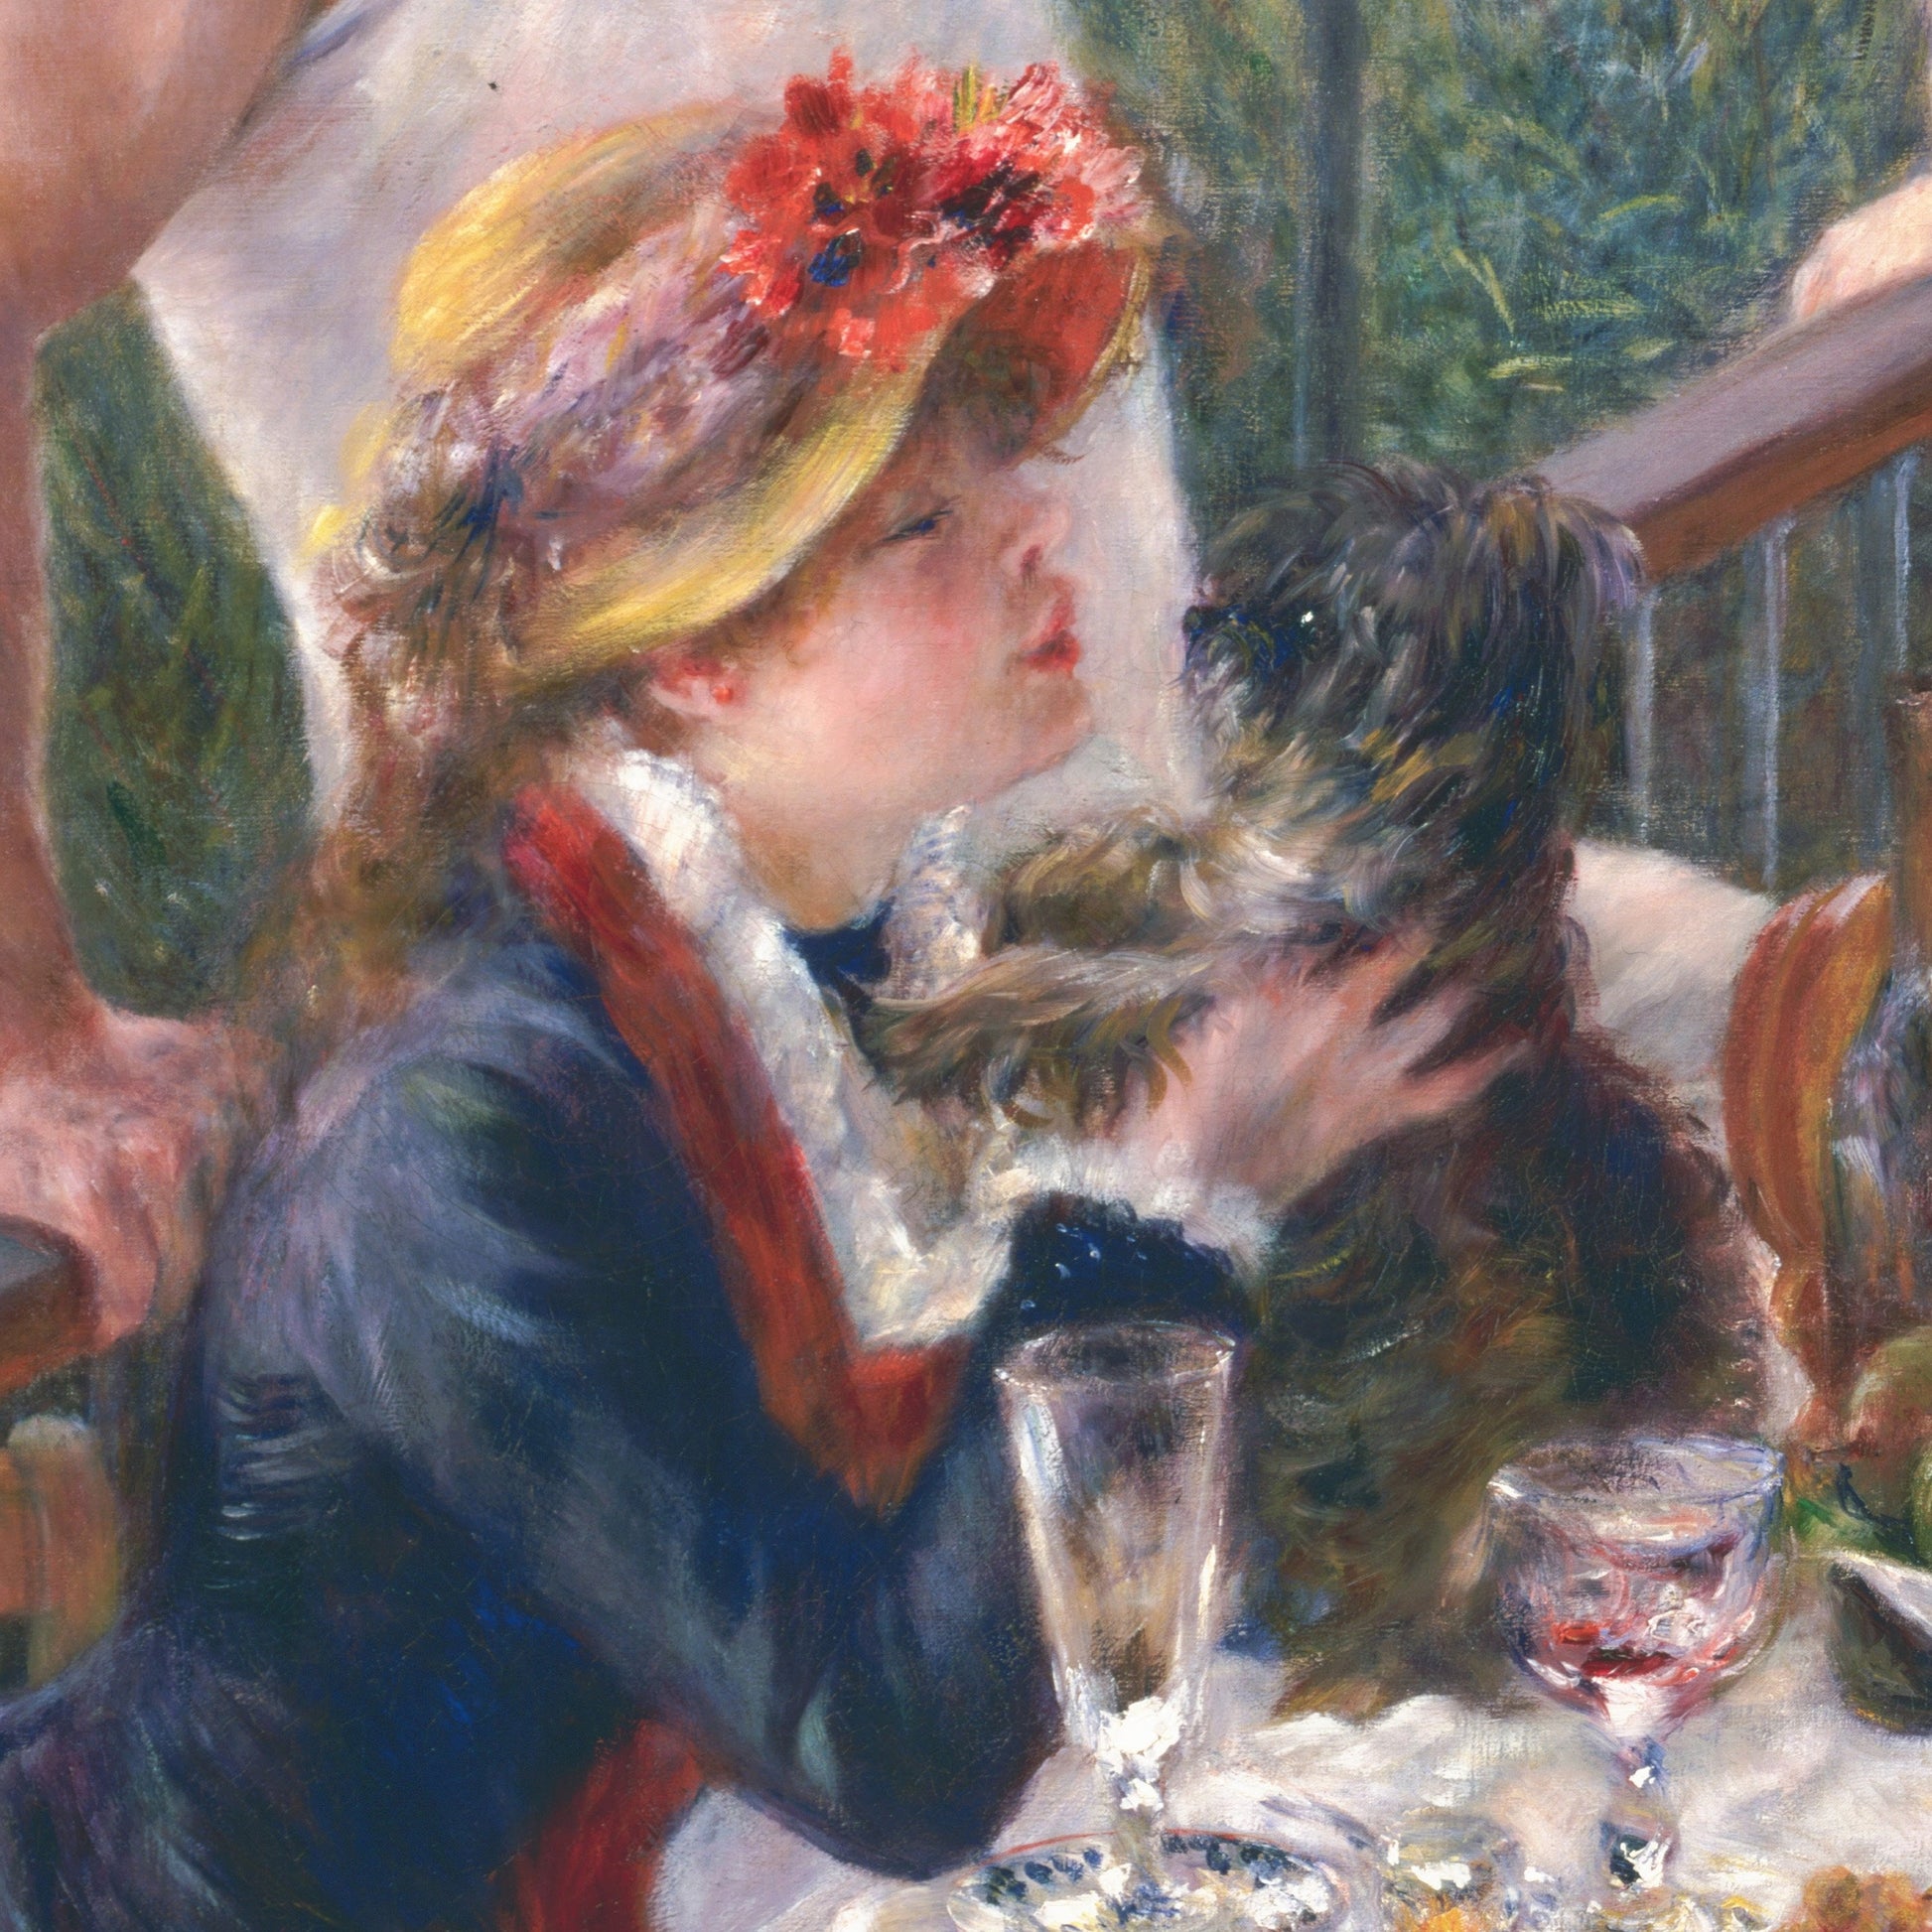 Luncheon of the Boating Party by Pierre Auguste Renoir, 3d Printed with texture and brush strokes looks like original oil-painting, code:412